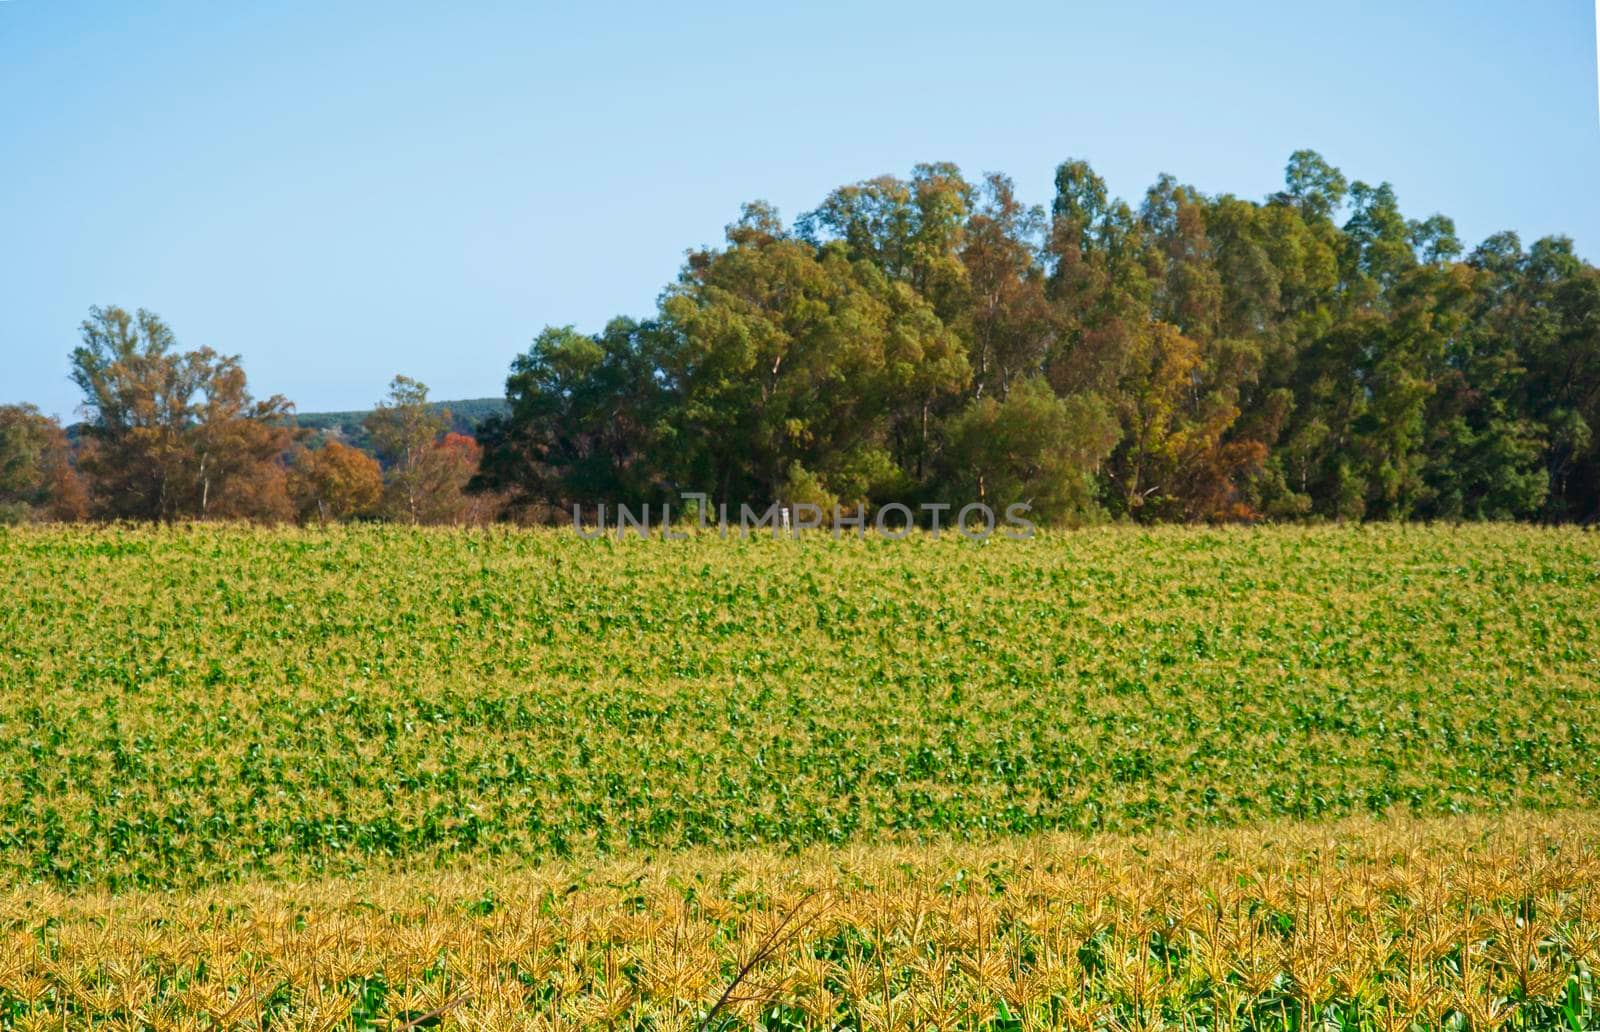 Wide green field with young yellow corn and autumn trees, blue sky. Seville, Spain